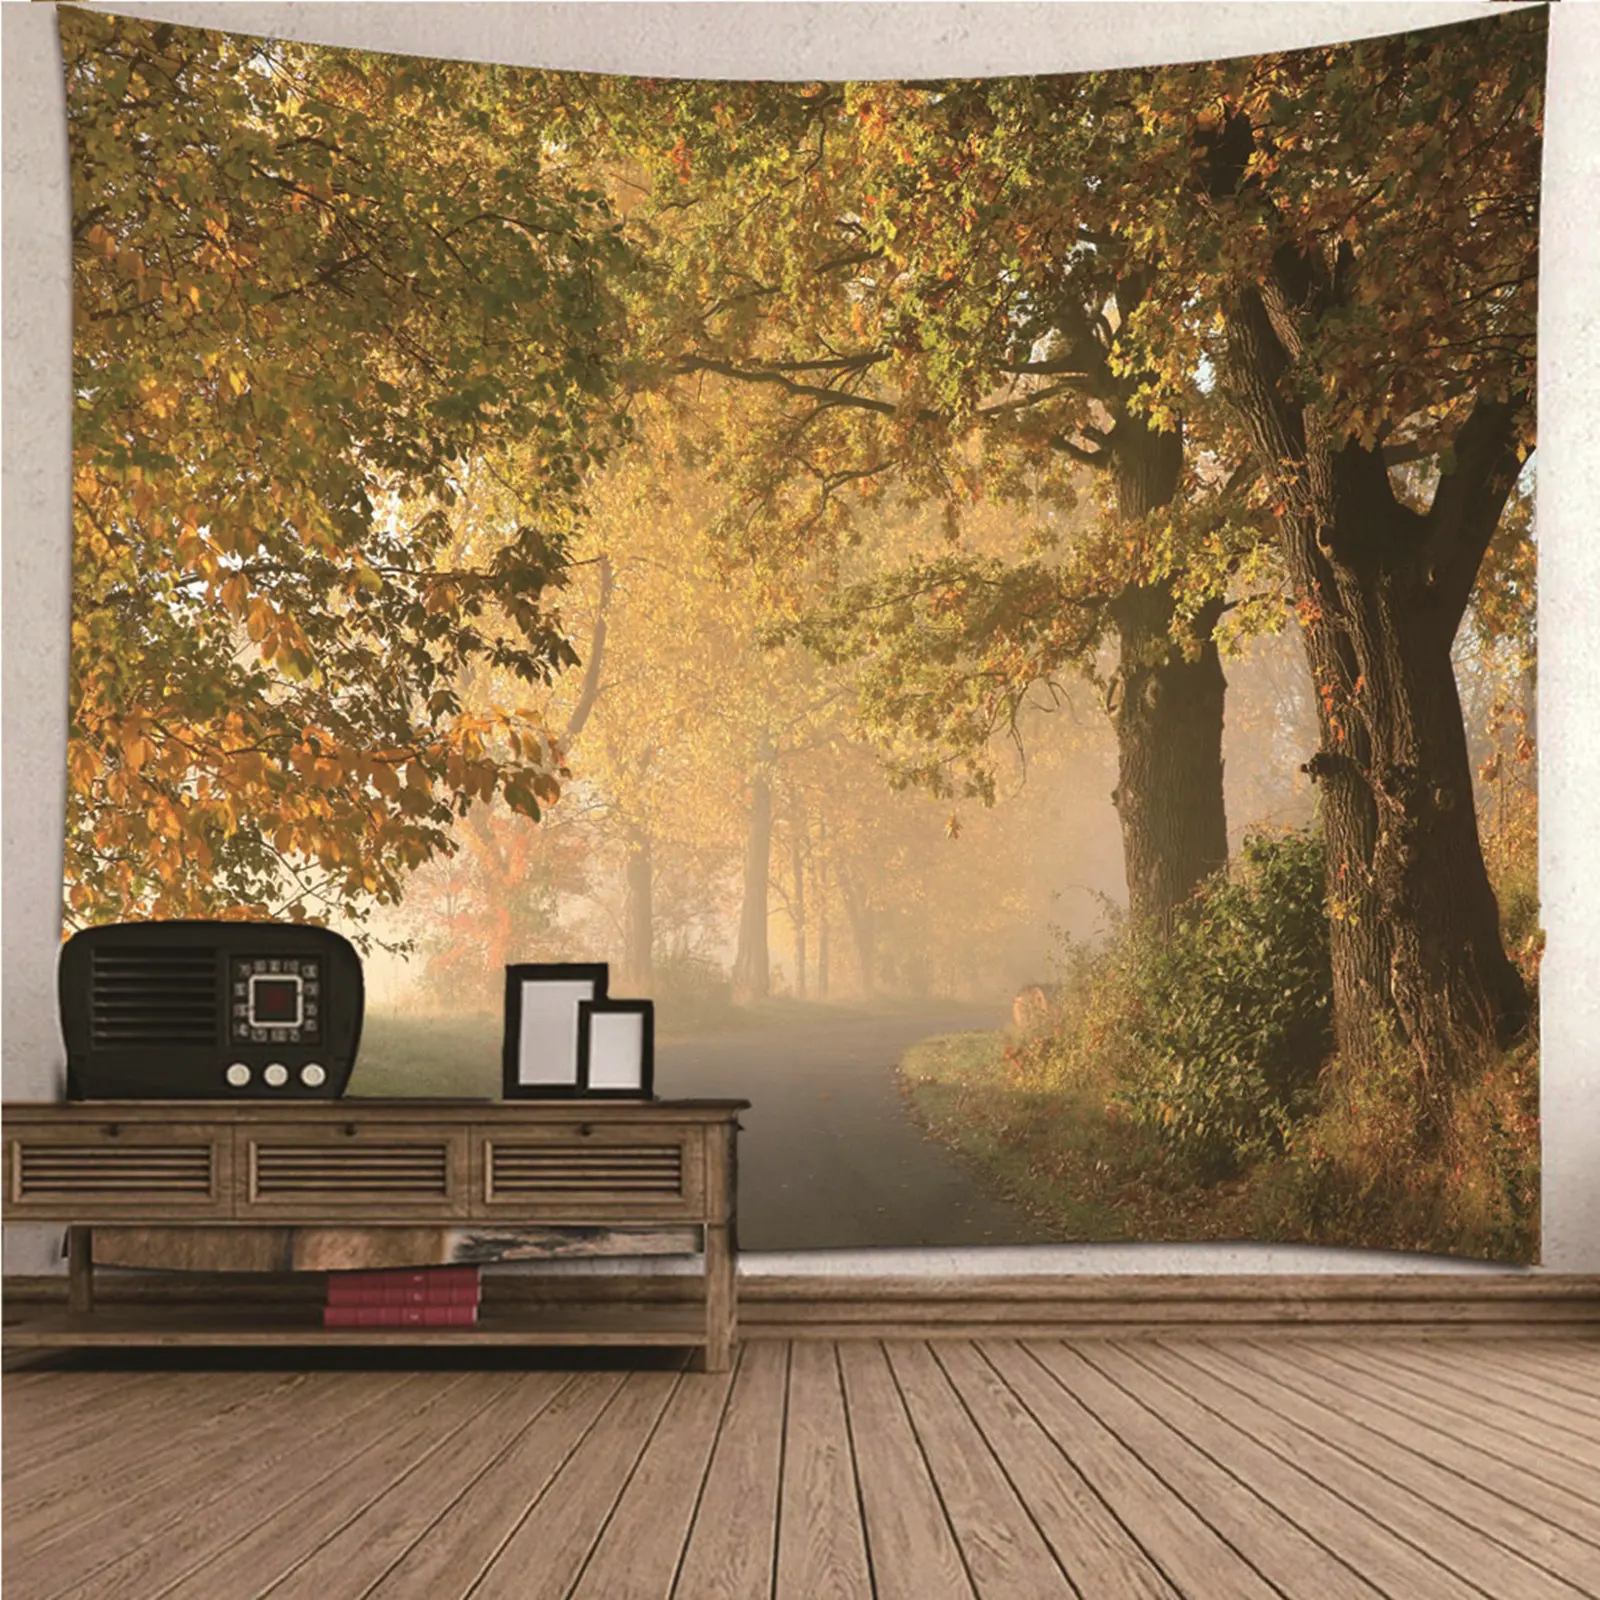 

Home Decor Kids Long Tapestry For Ceiling natural scenery Autumn Woods Wall Hanging Blanket Dorm Art Decor Covering